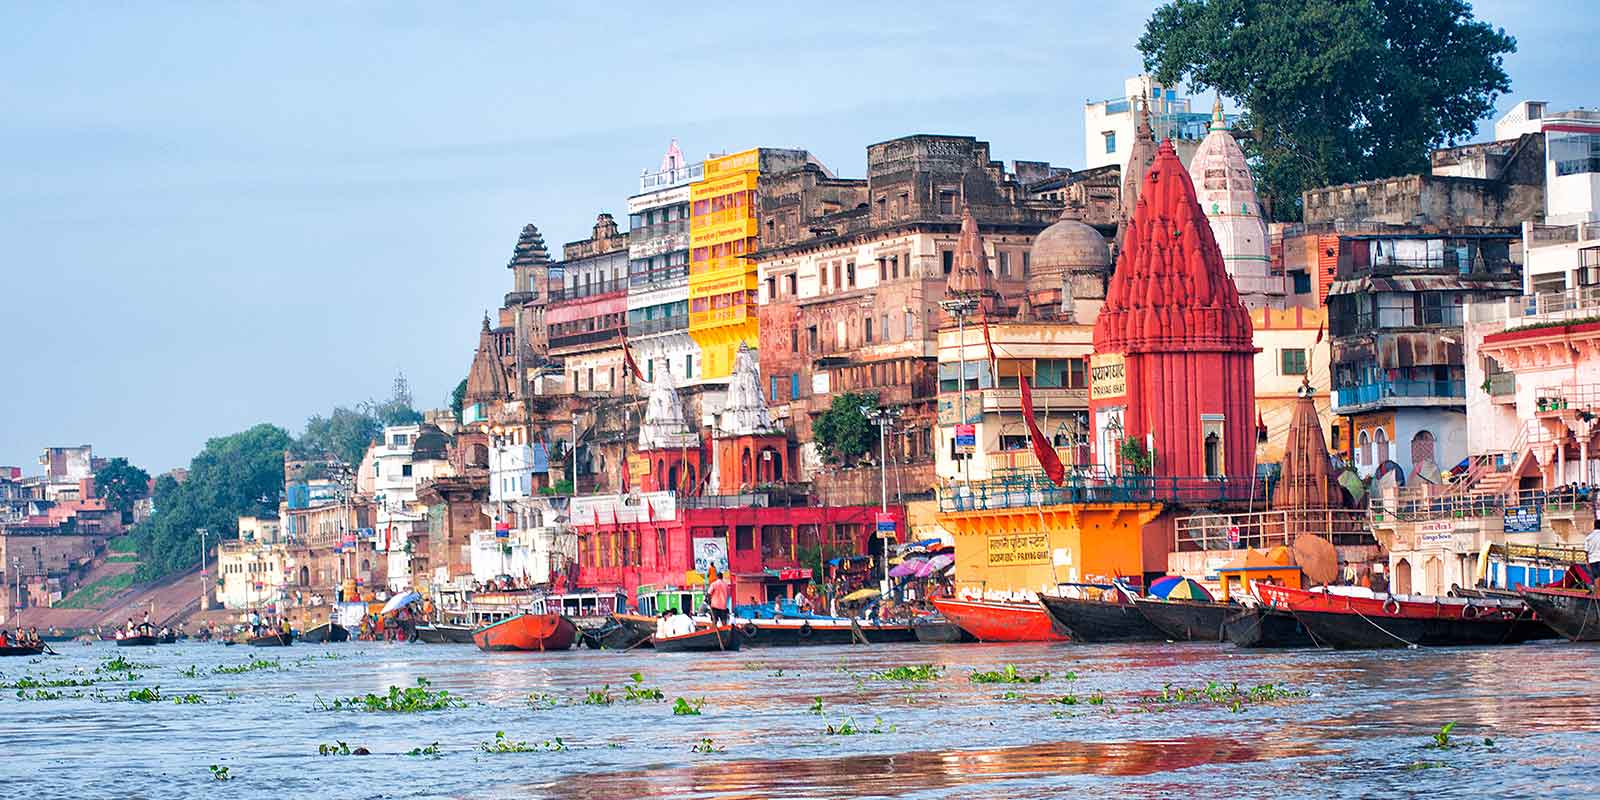 View of Varanasi and ghats from the River Ganges